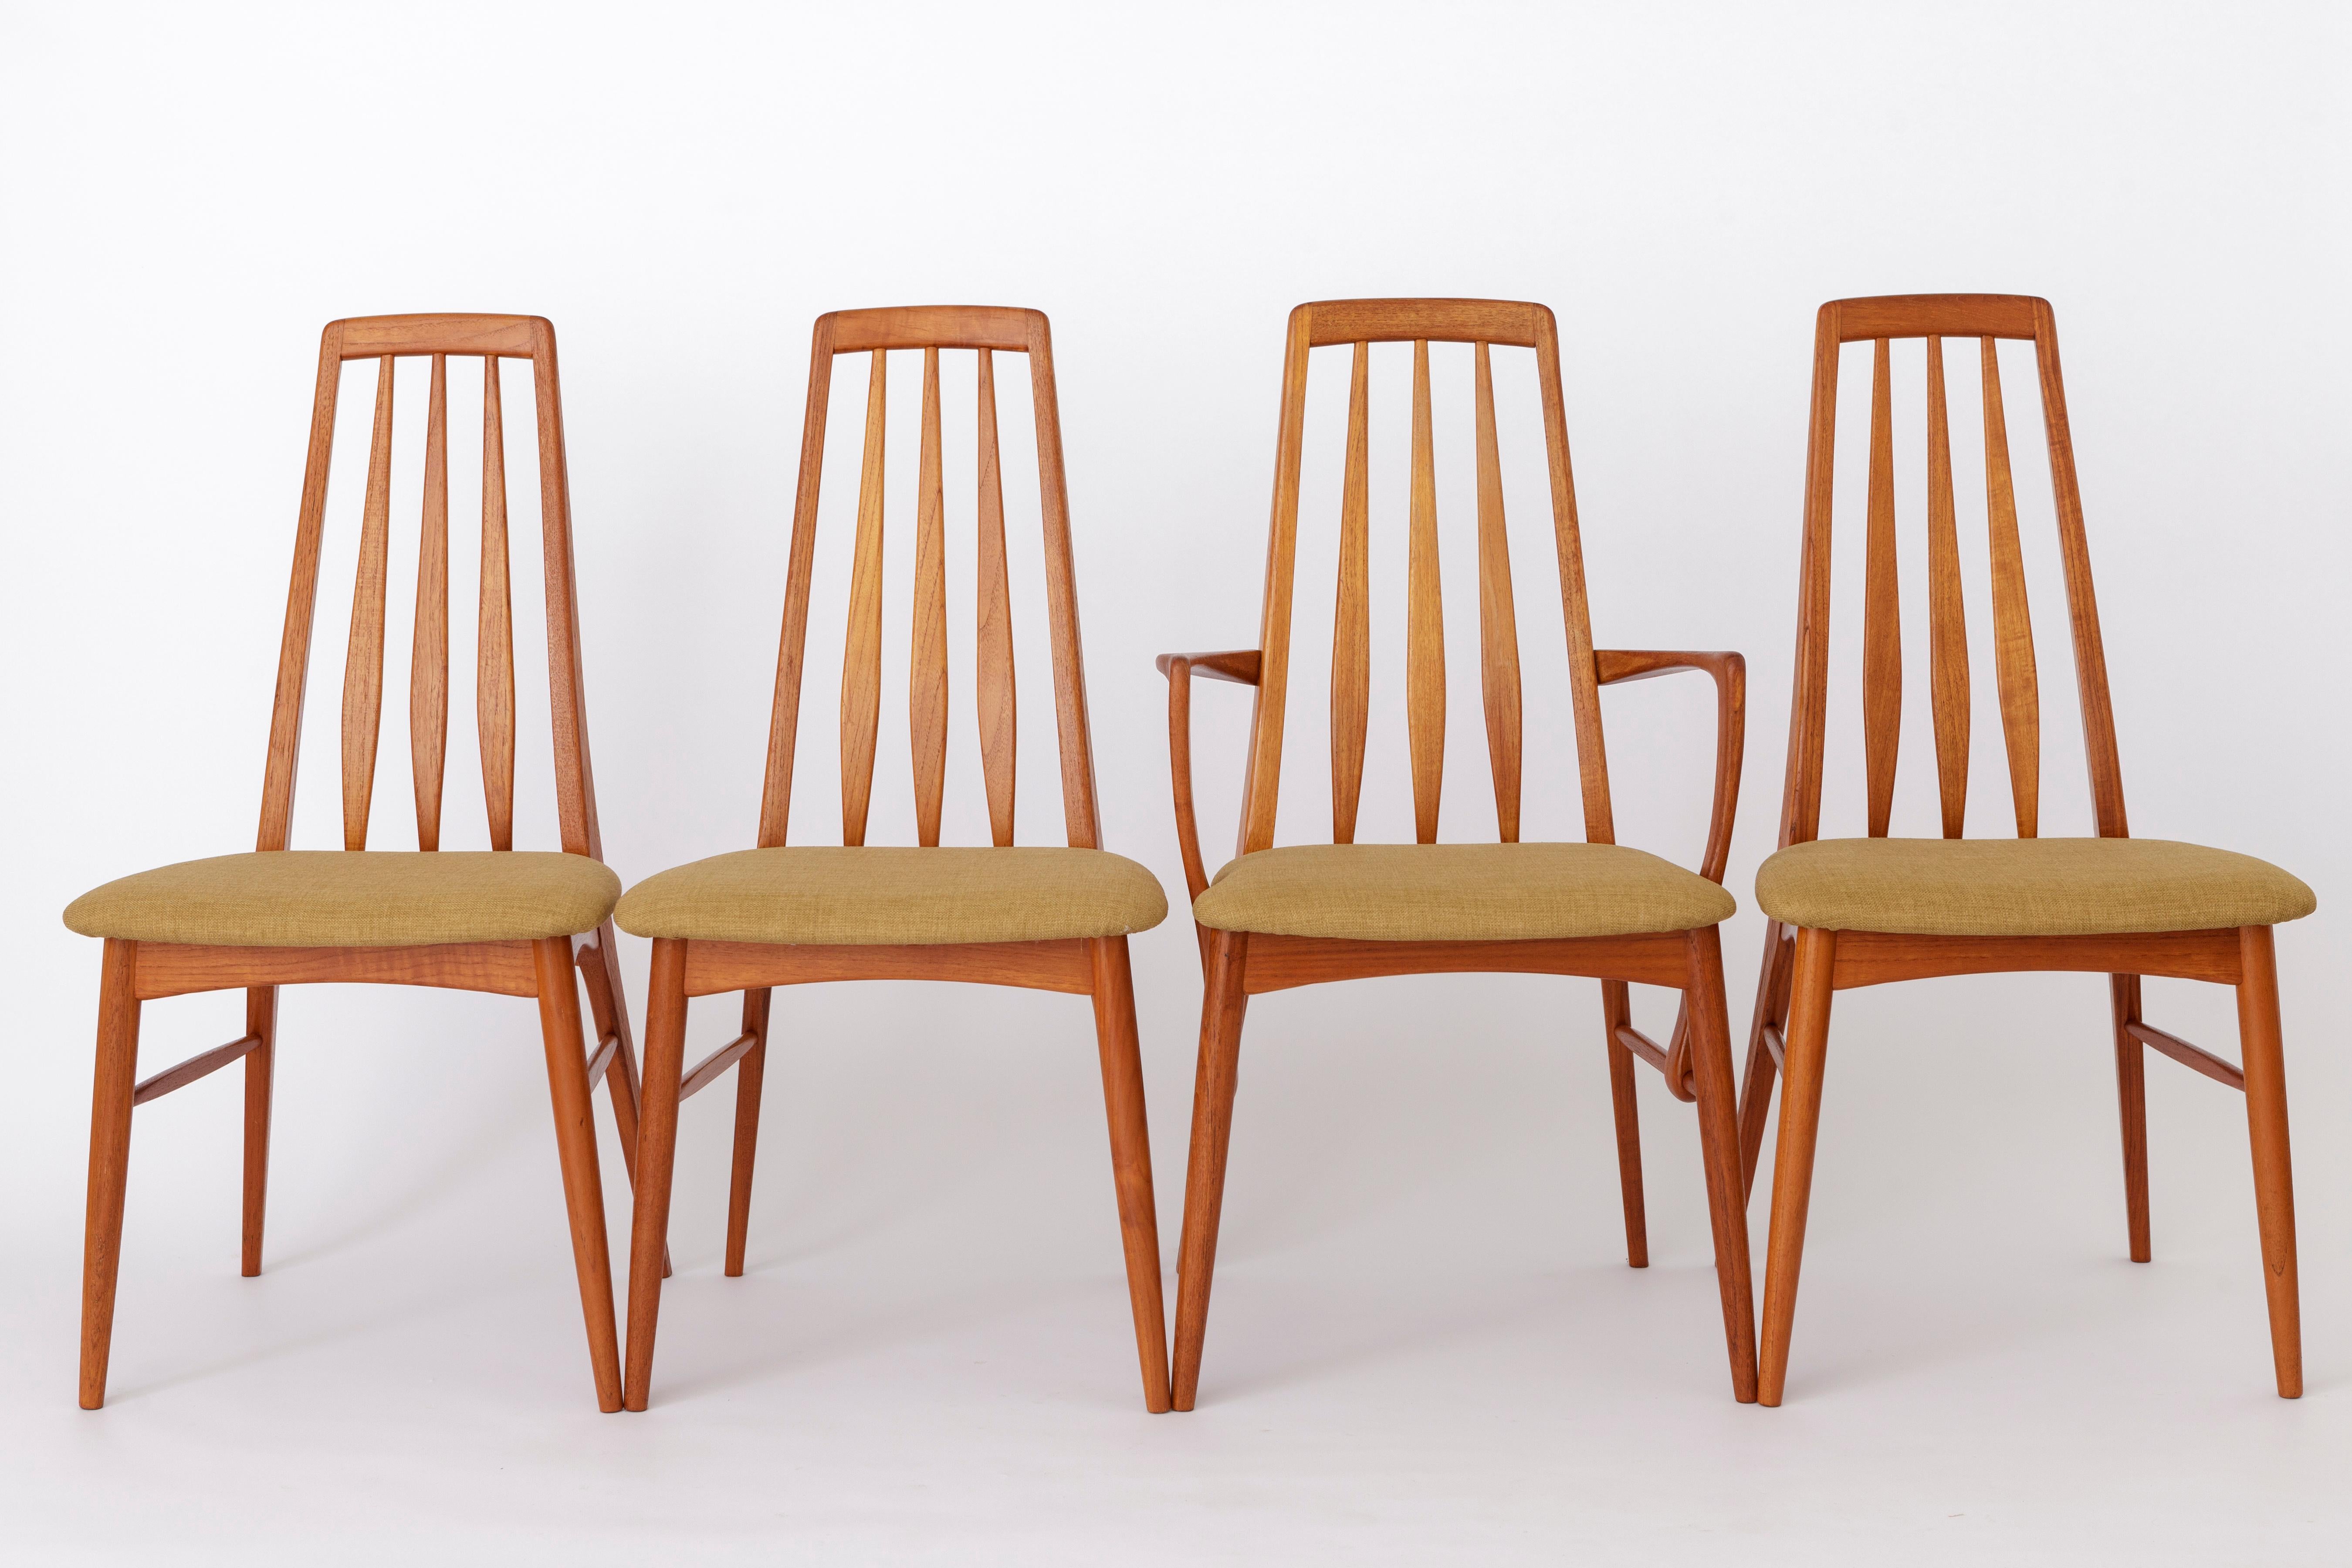 Set of 6 teak chairs by Danish designer and manufacturer Niels Koefoed. 
Production period: 1960s. 
Displayed price is for a set of 6 (2 armchairs + 4 side chairs). 

Sturdy teak chair frames. Refurbished and oiled. 
Seats reupholstered with textile